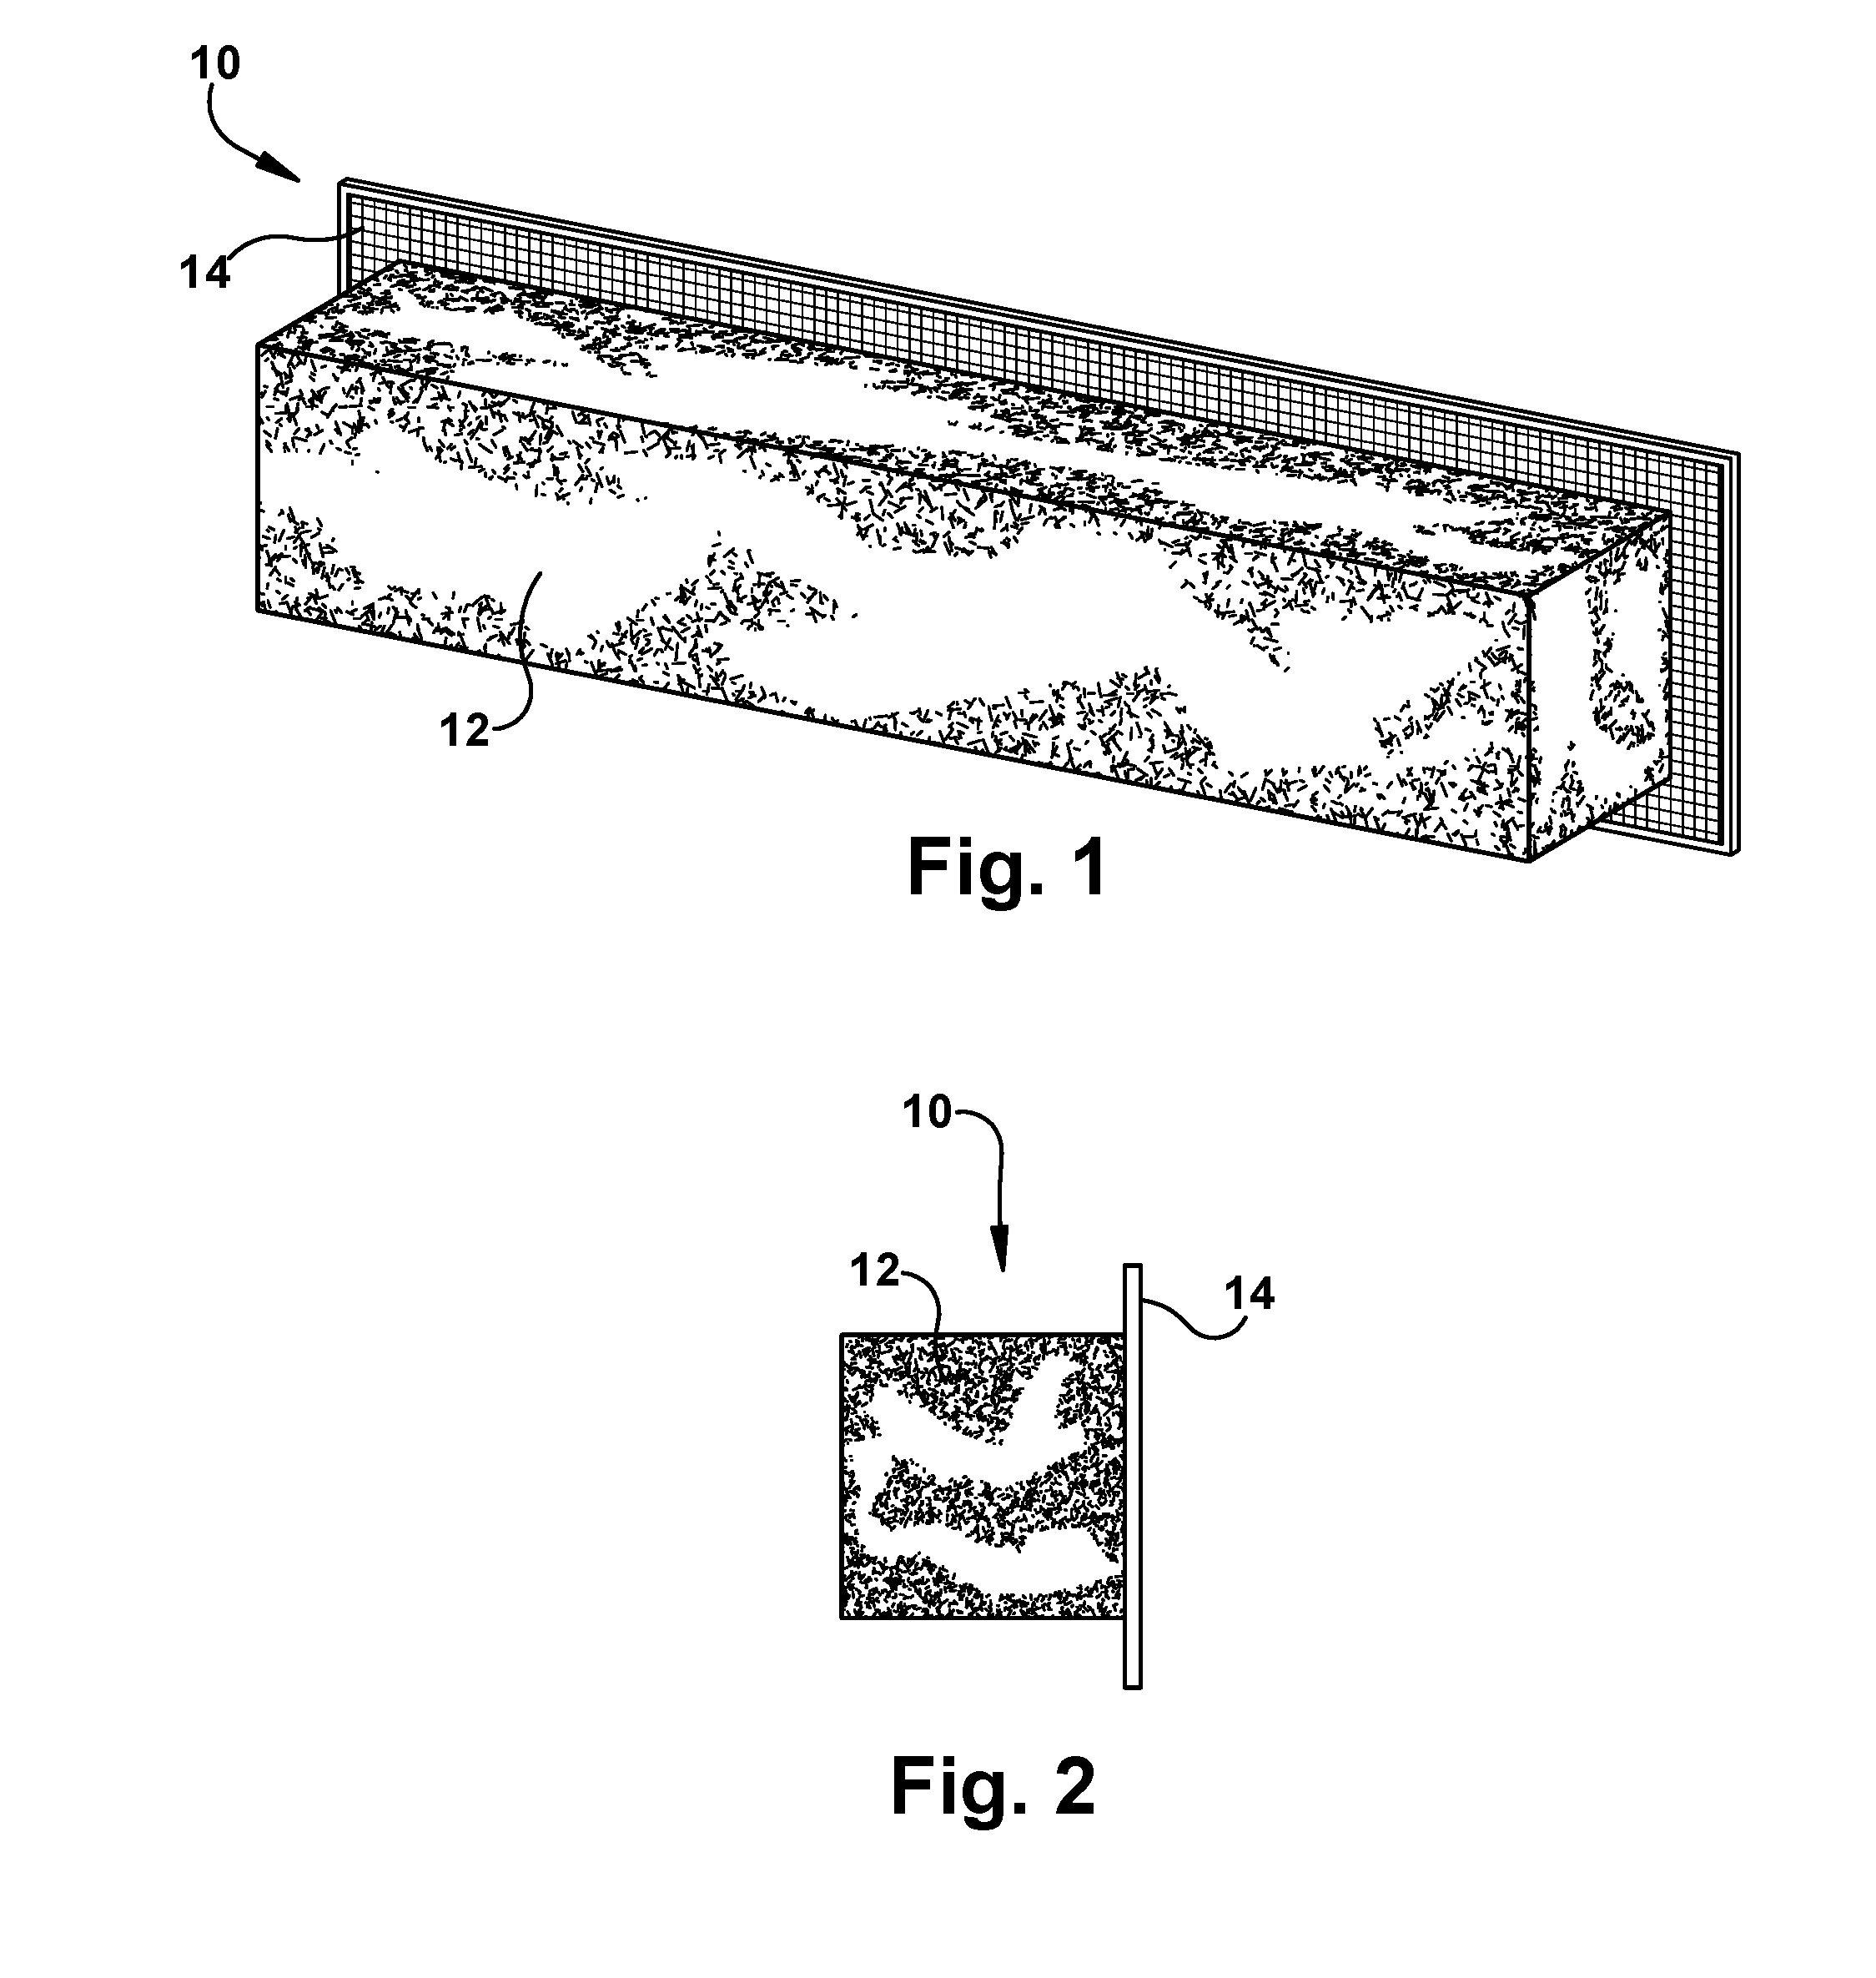 Vent filter and appliance utilizing such a filter